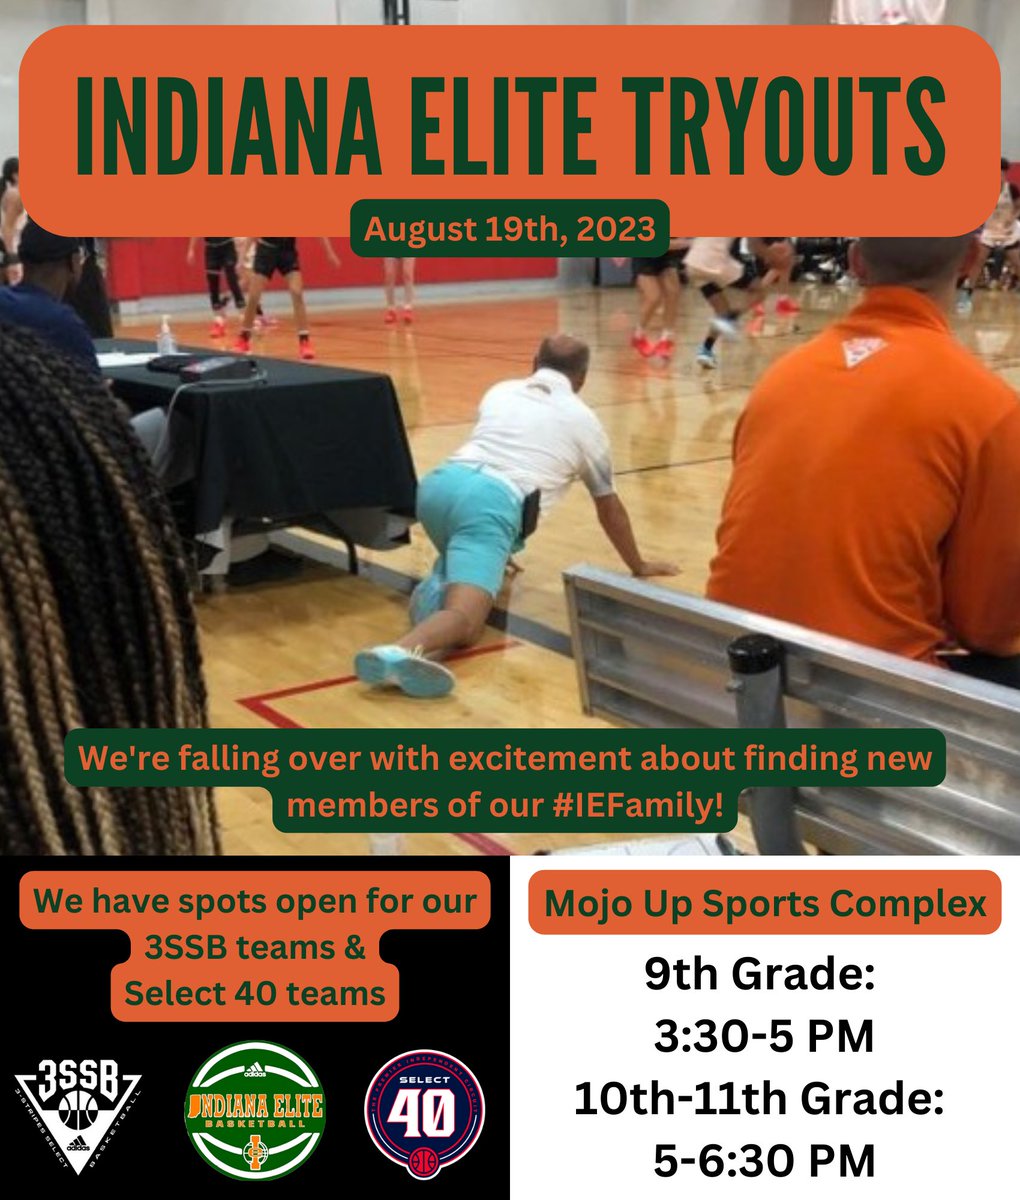 Don't trip and miss the opportunity to join our #IEFamily! 🟠🟢

Register today ⬇️
register.usayouthhoops.com/site/register/…